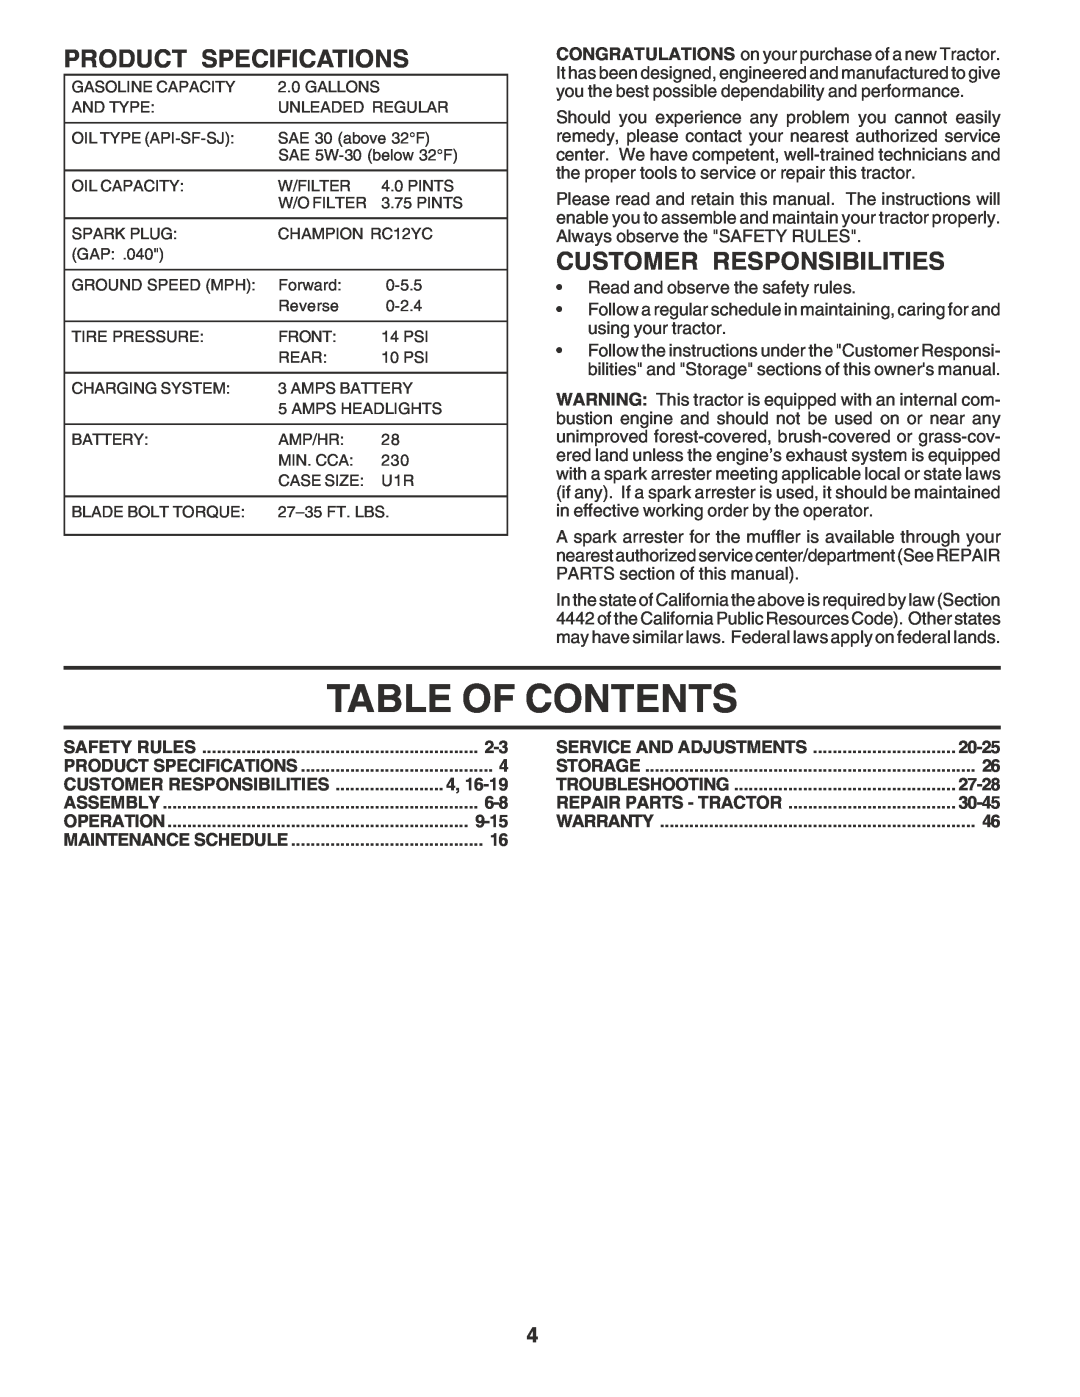 Poulan PPR20H42STA owner manual Table Of Contents, Product Specifications, Customer Responsibilities 